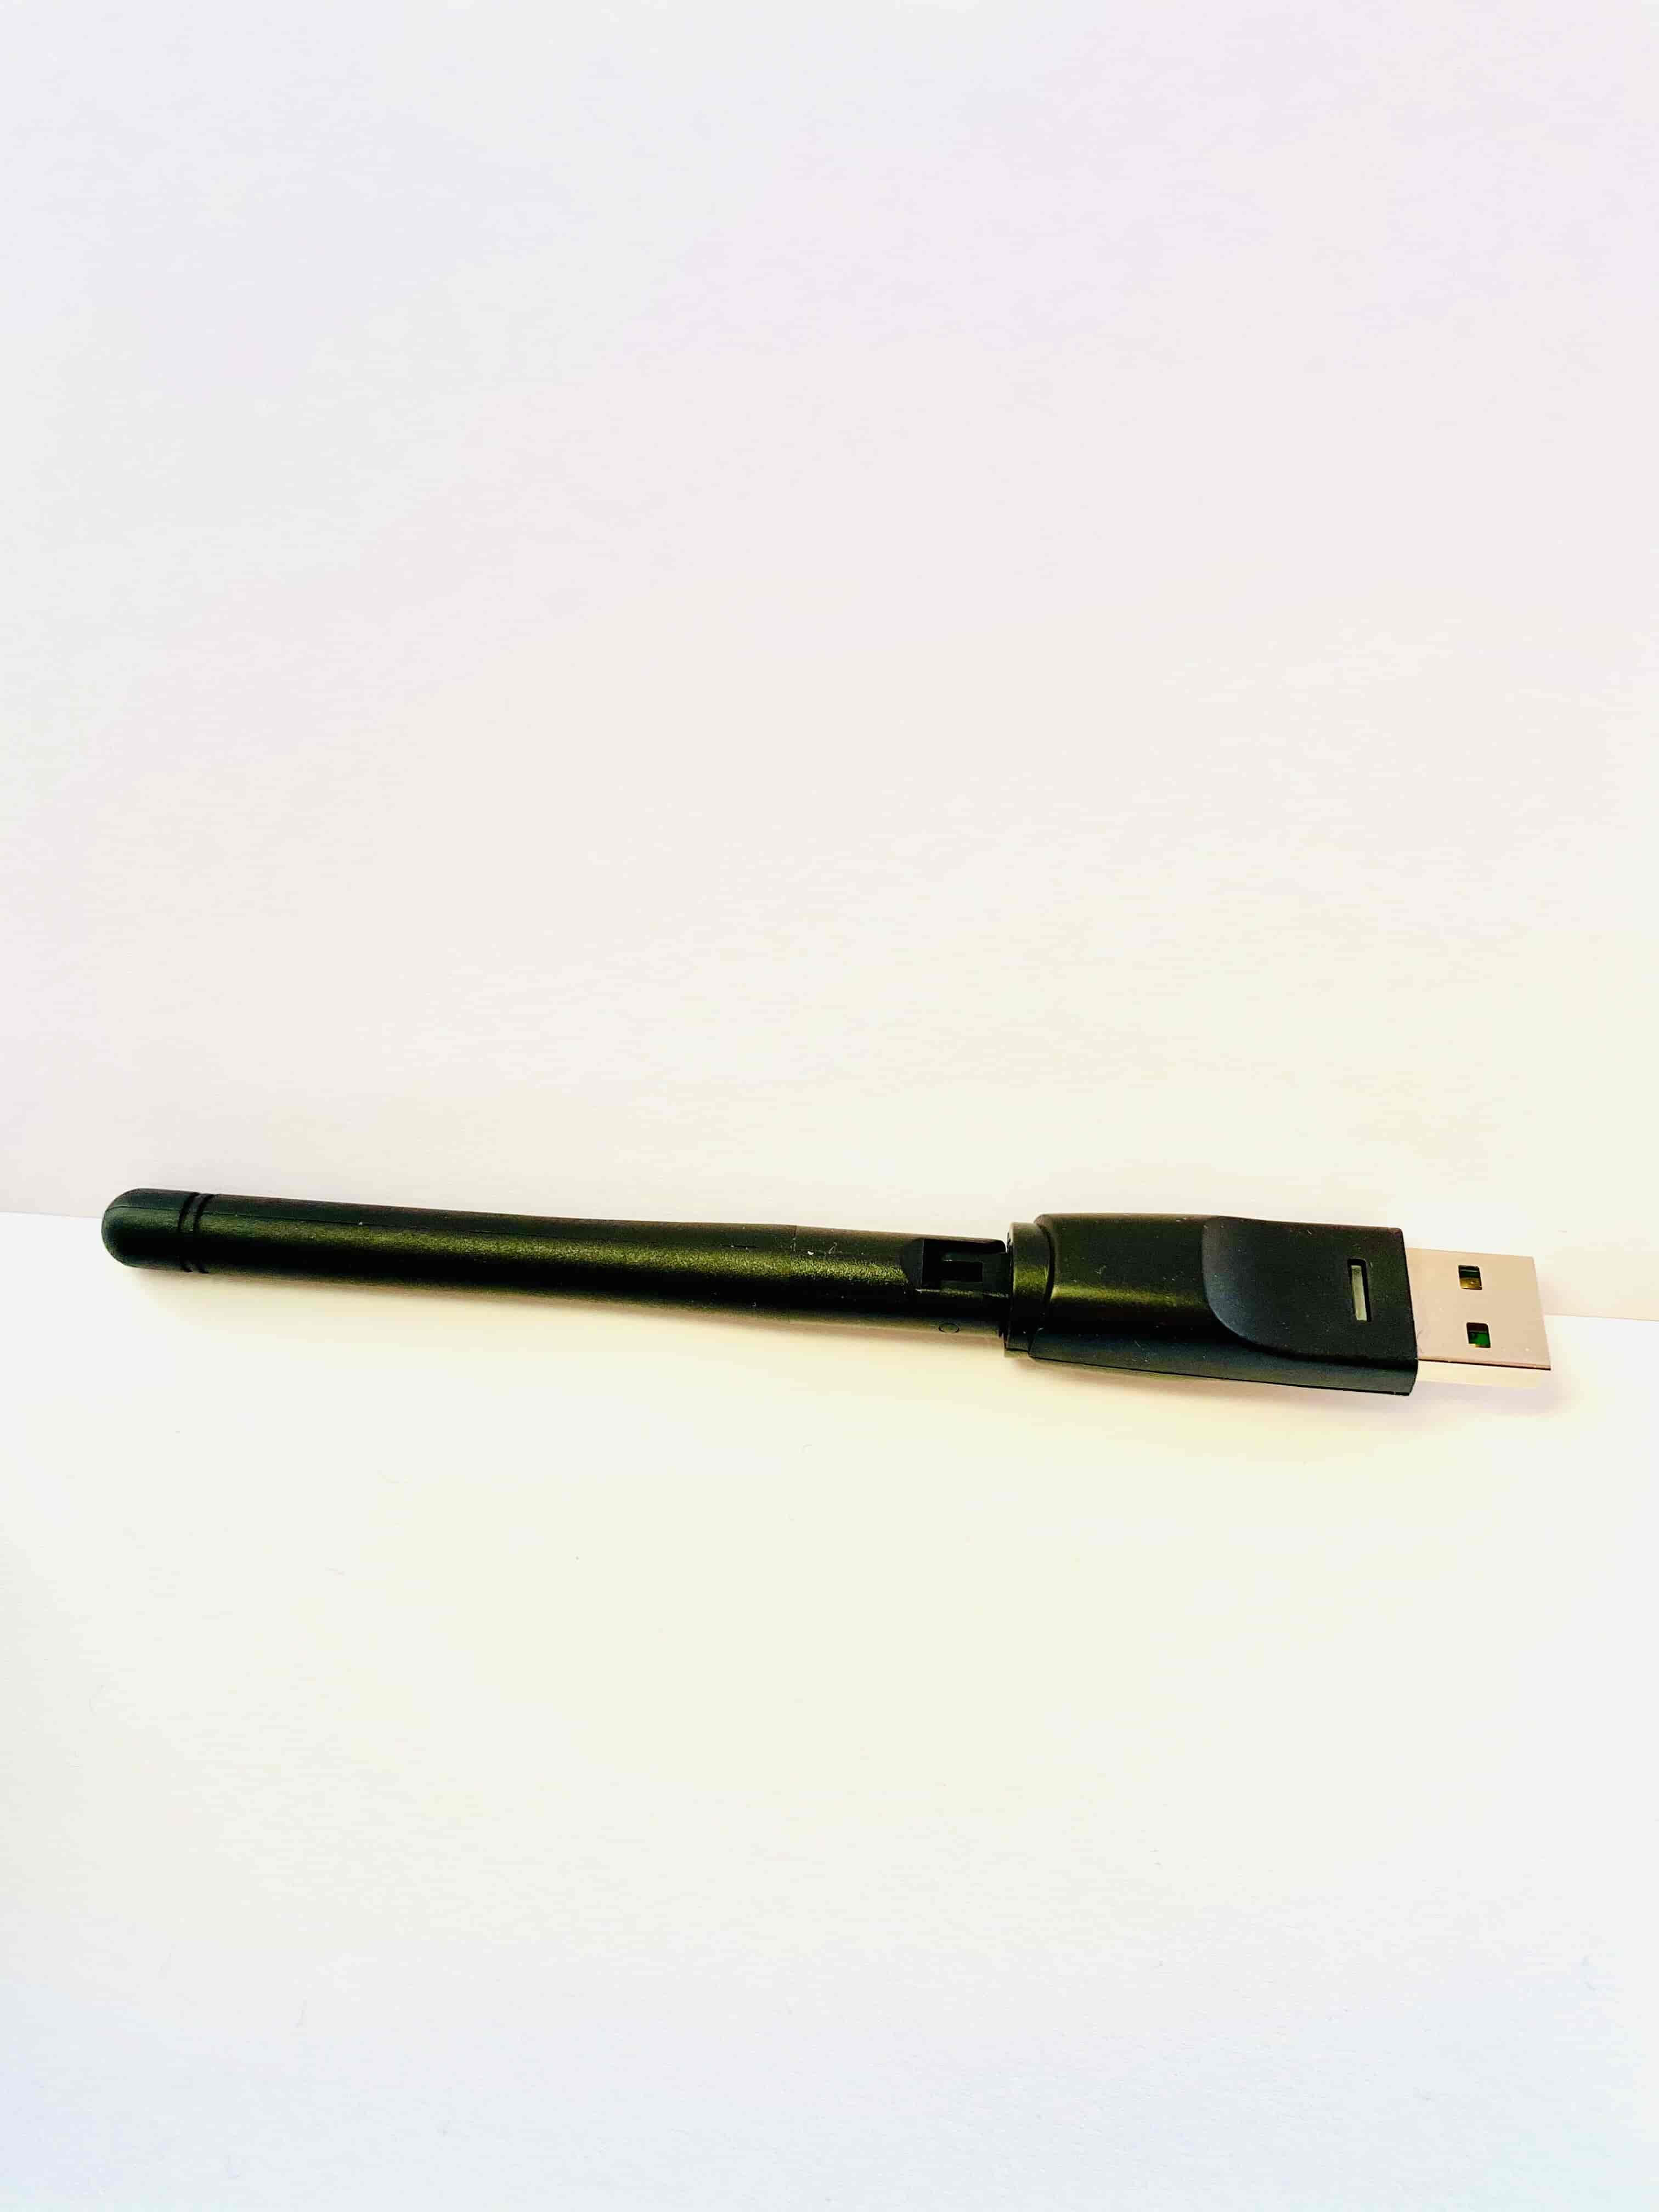 Qviart WiFI USB adapter with antenna - 2.4 GHz-150 MbpsQviart WiFI USB adapter with antenna. With this adapter you can quickly add wireless functionality to your Qviart equipment. The WiFI USB adapter has an external antenna which increases the range and the ability to achieve stable high speeds.QVIART LUNIX